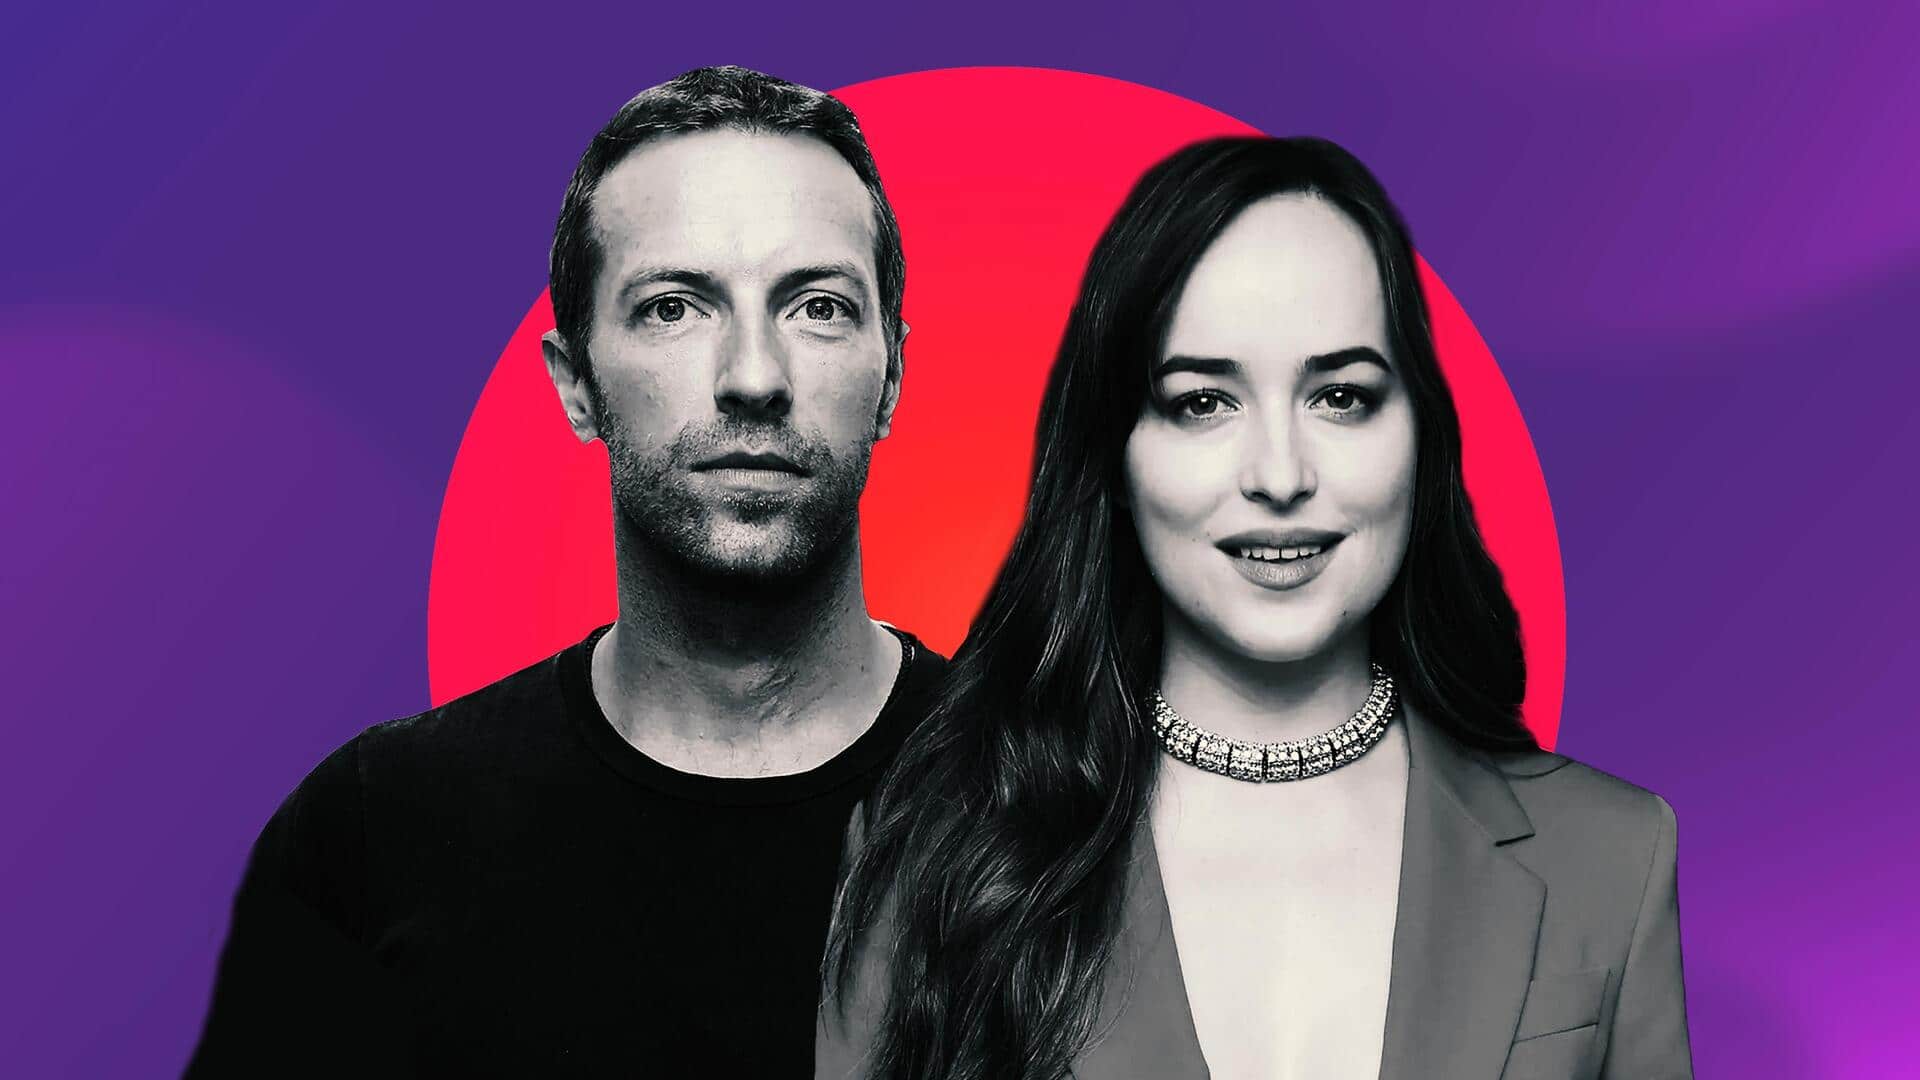 Chris Martin-Dakota Johnson engaged after dating for six years: Report